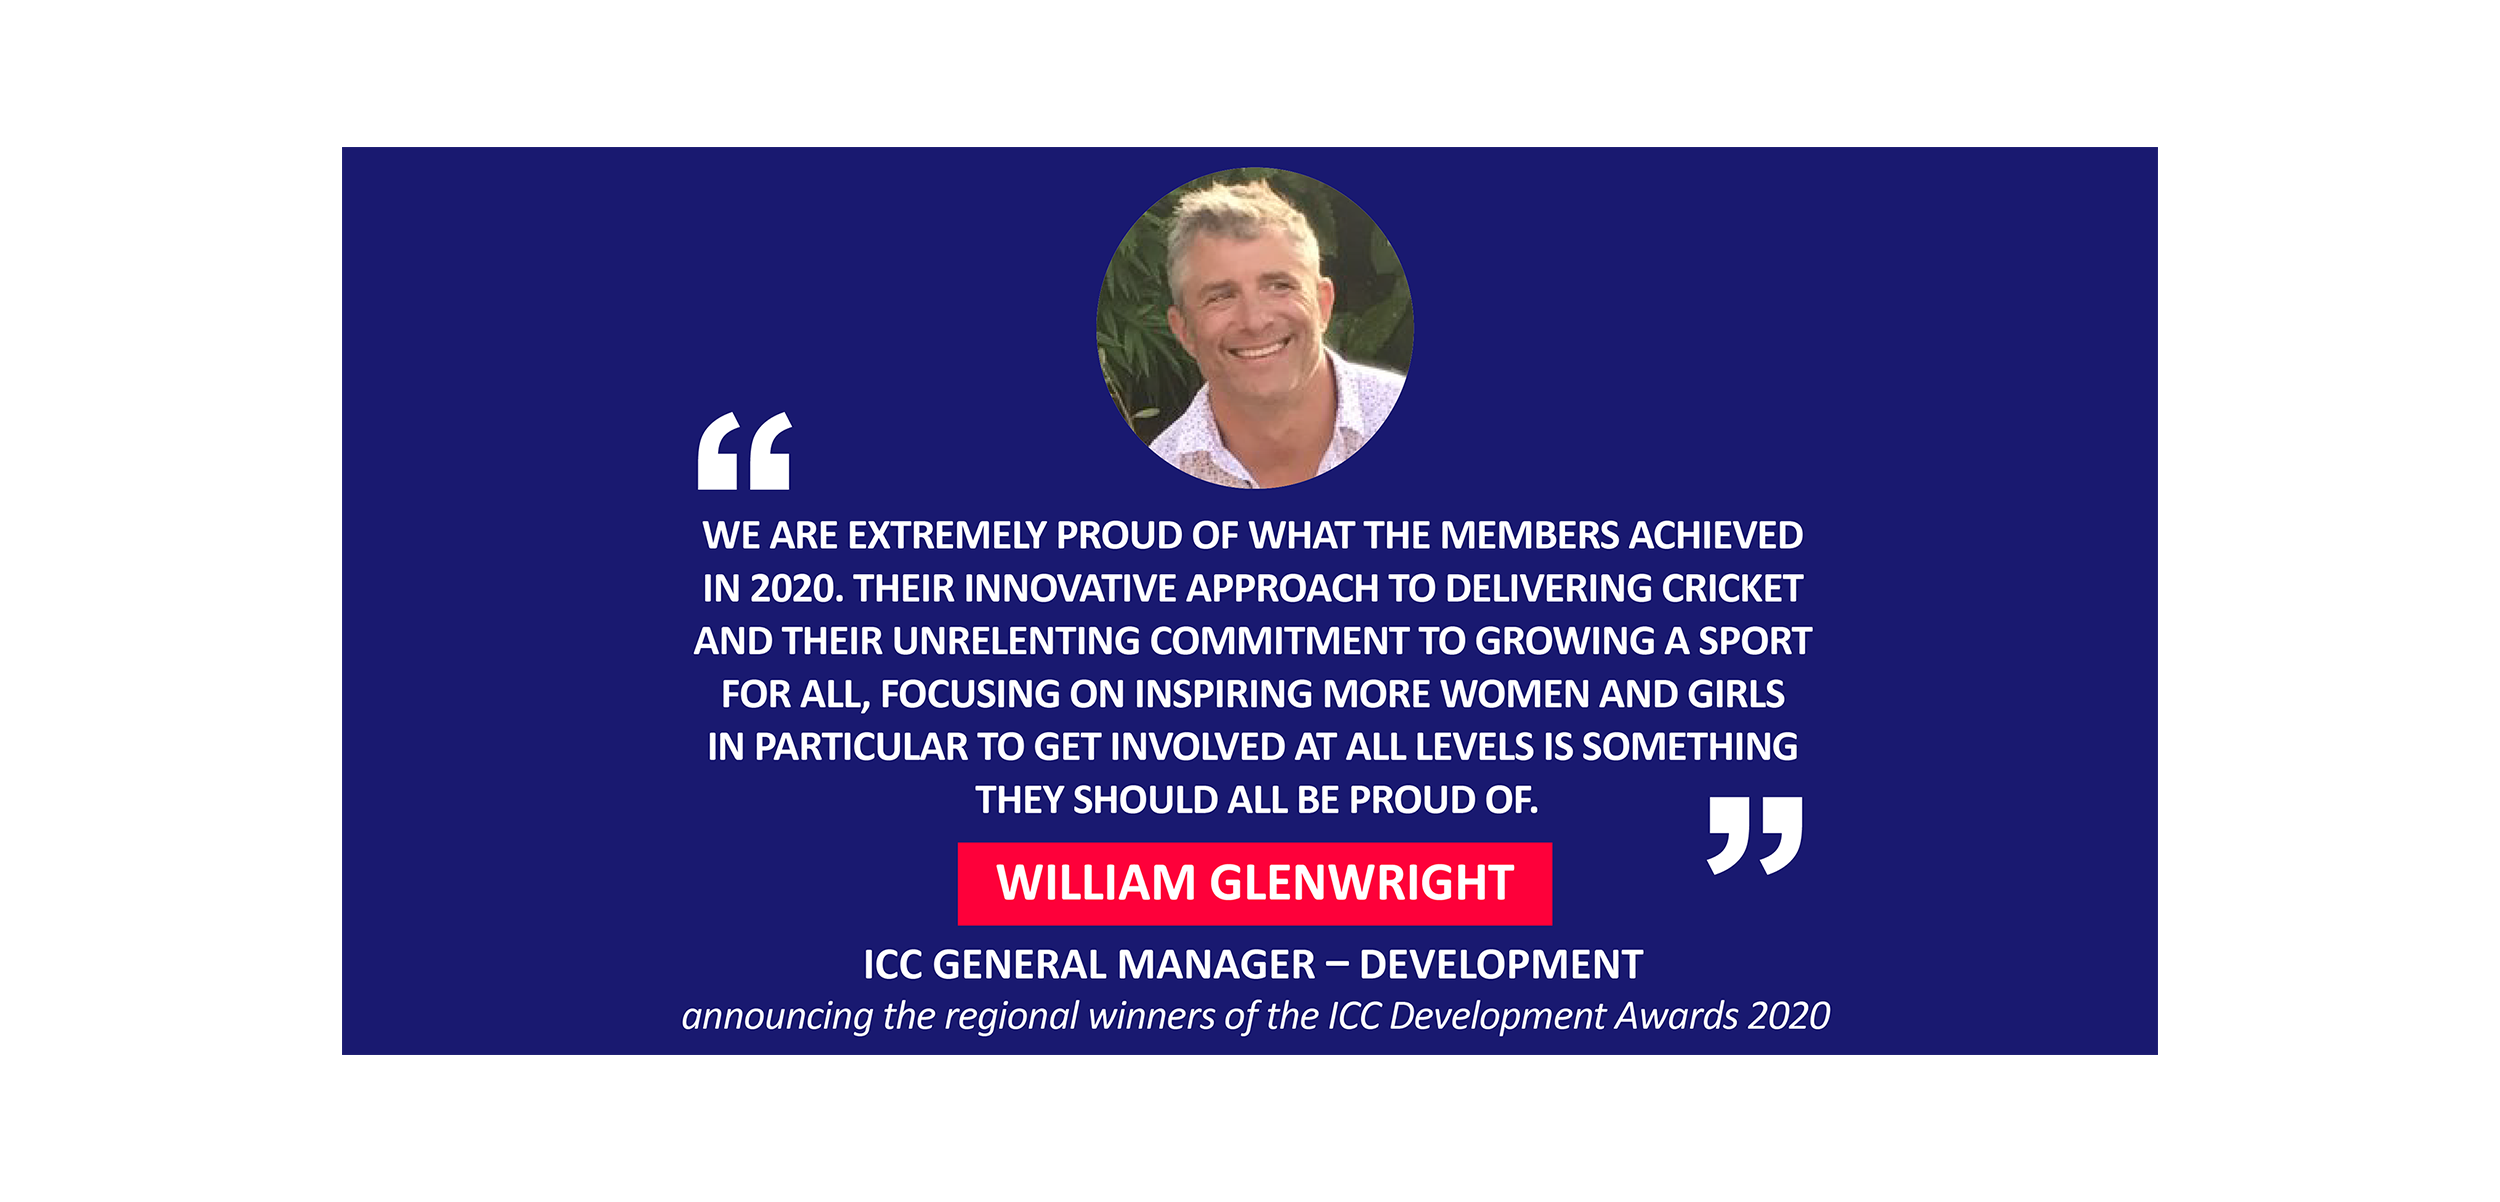 William Glenwright, ICC General Manager – Development announcing the regional winners of the ICC Development Awards 2020